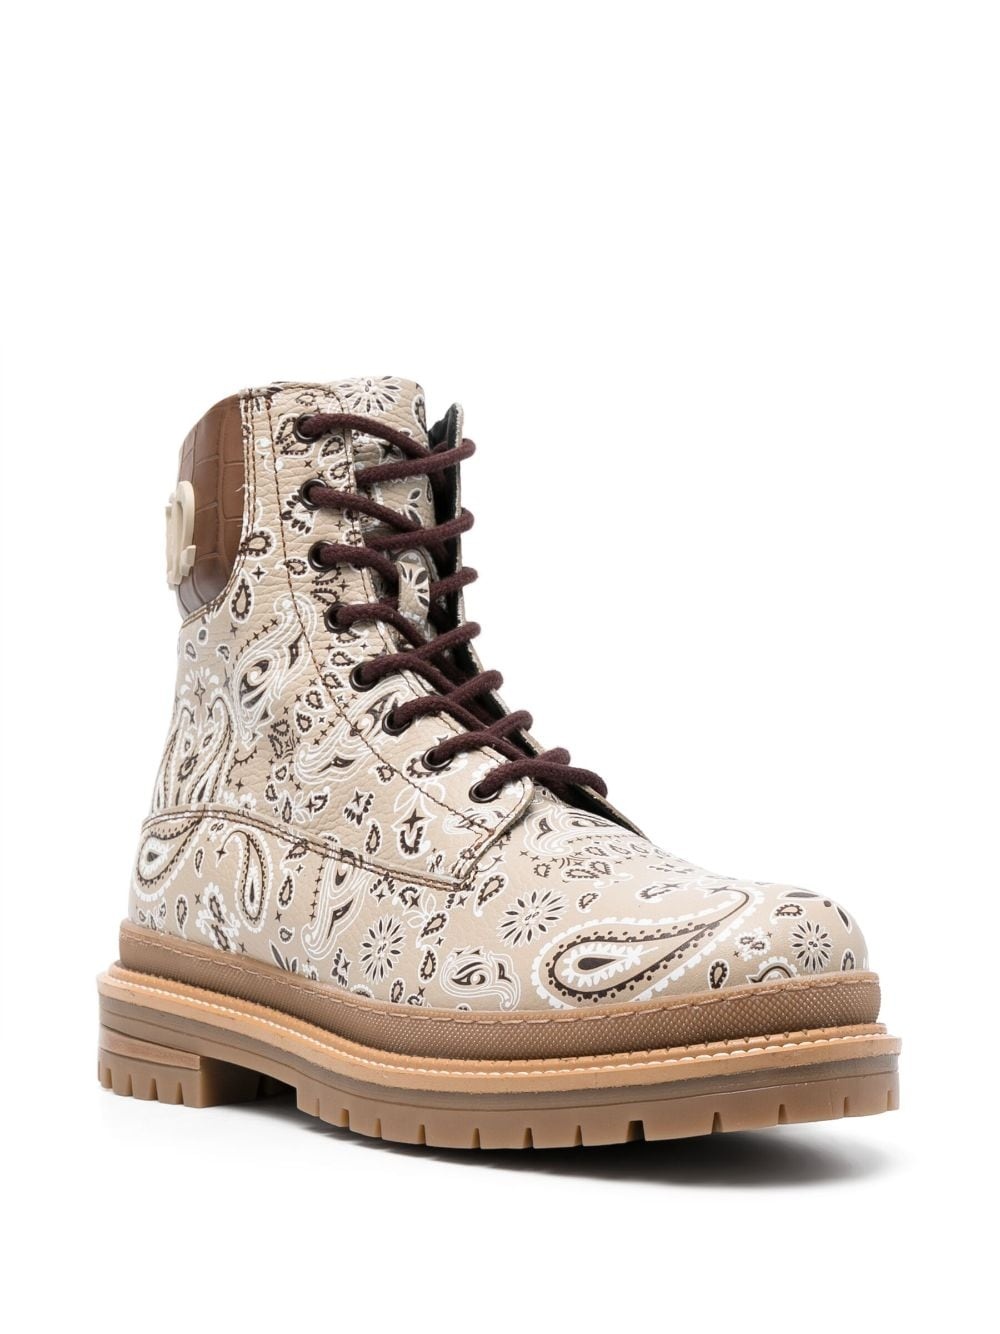 paisley-print leather ankle boots - 2